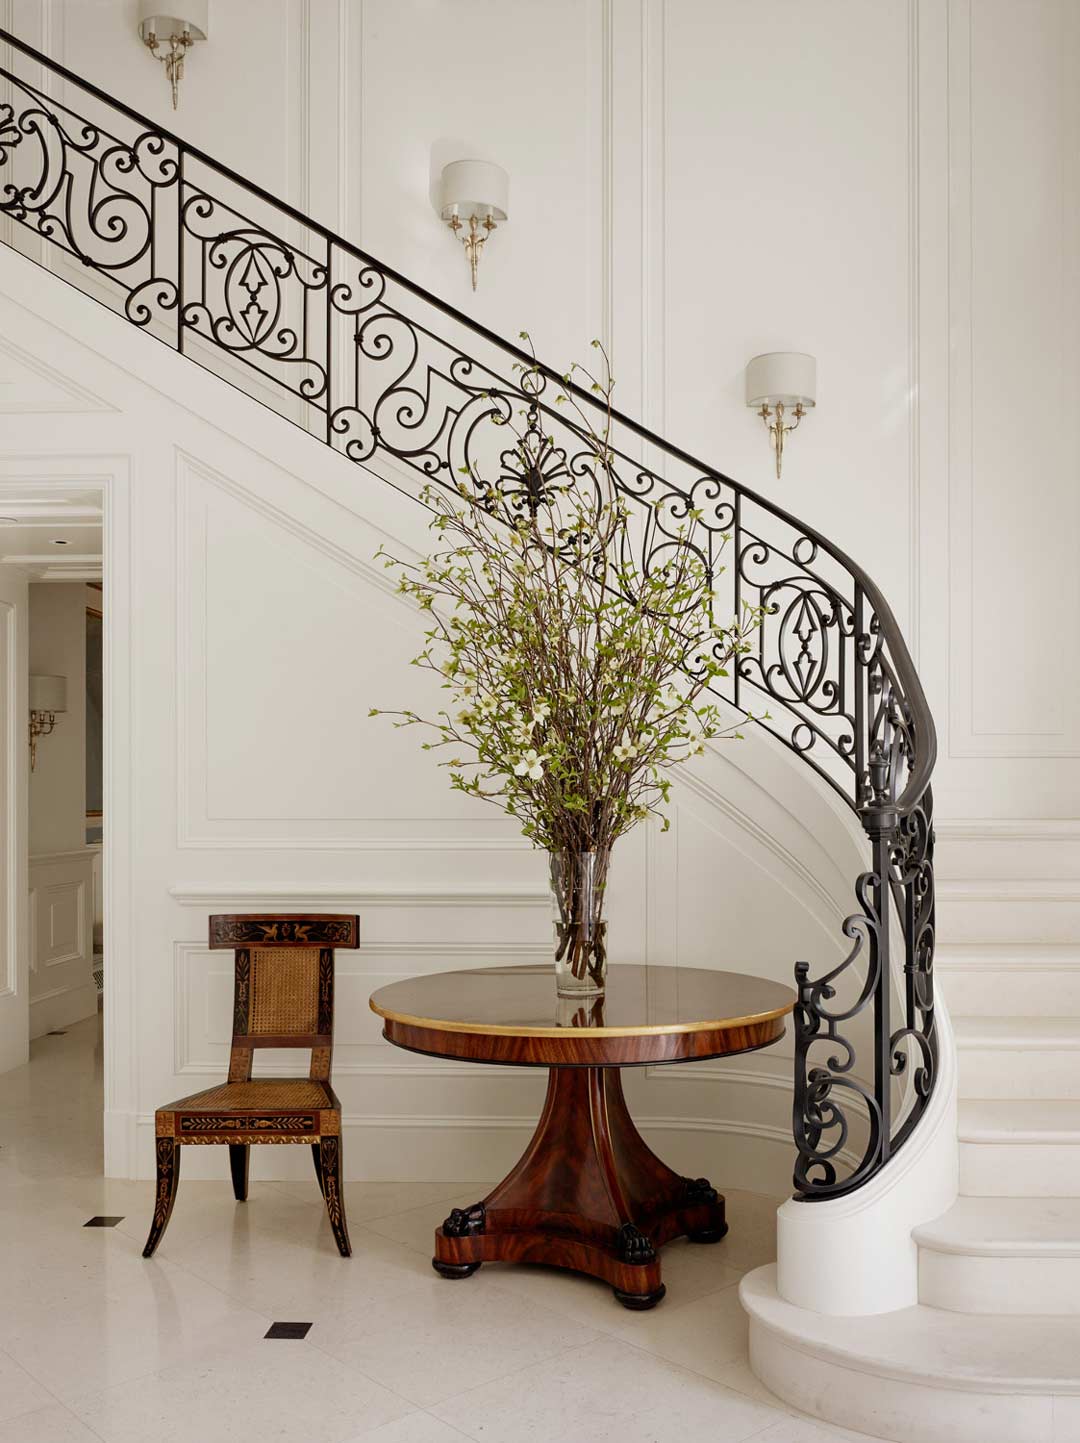 An Elegant Entry Way Staircase And Dark Vintage Timber Furniture Brings A Rich Sense Of Luxuary To This Old Money Aesthetic Home 